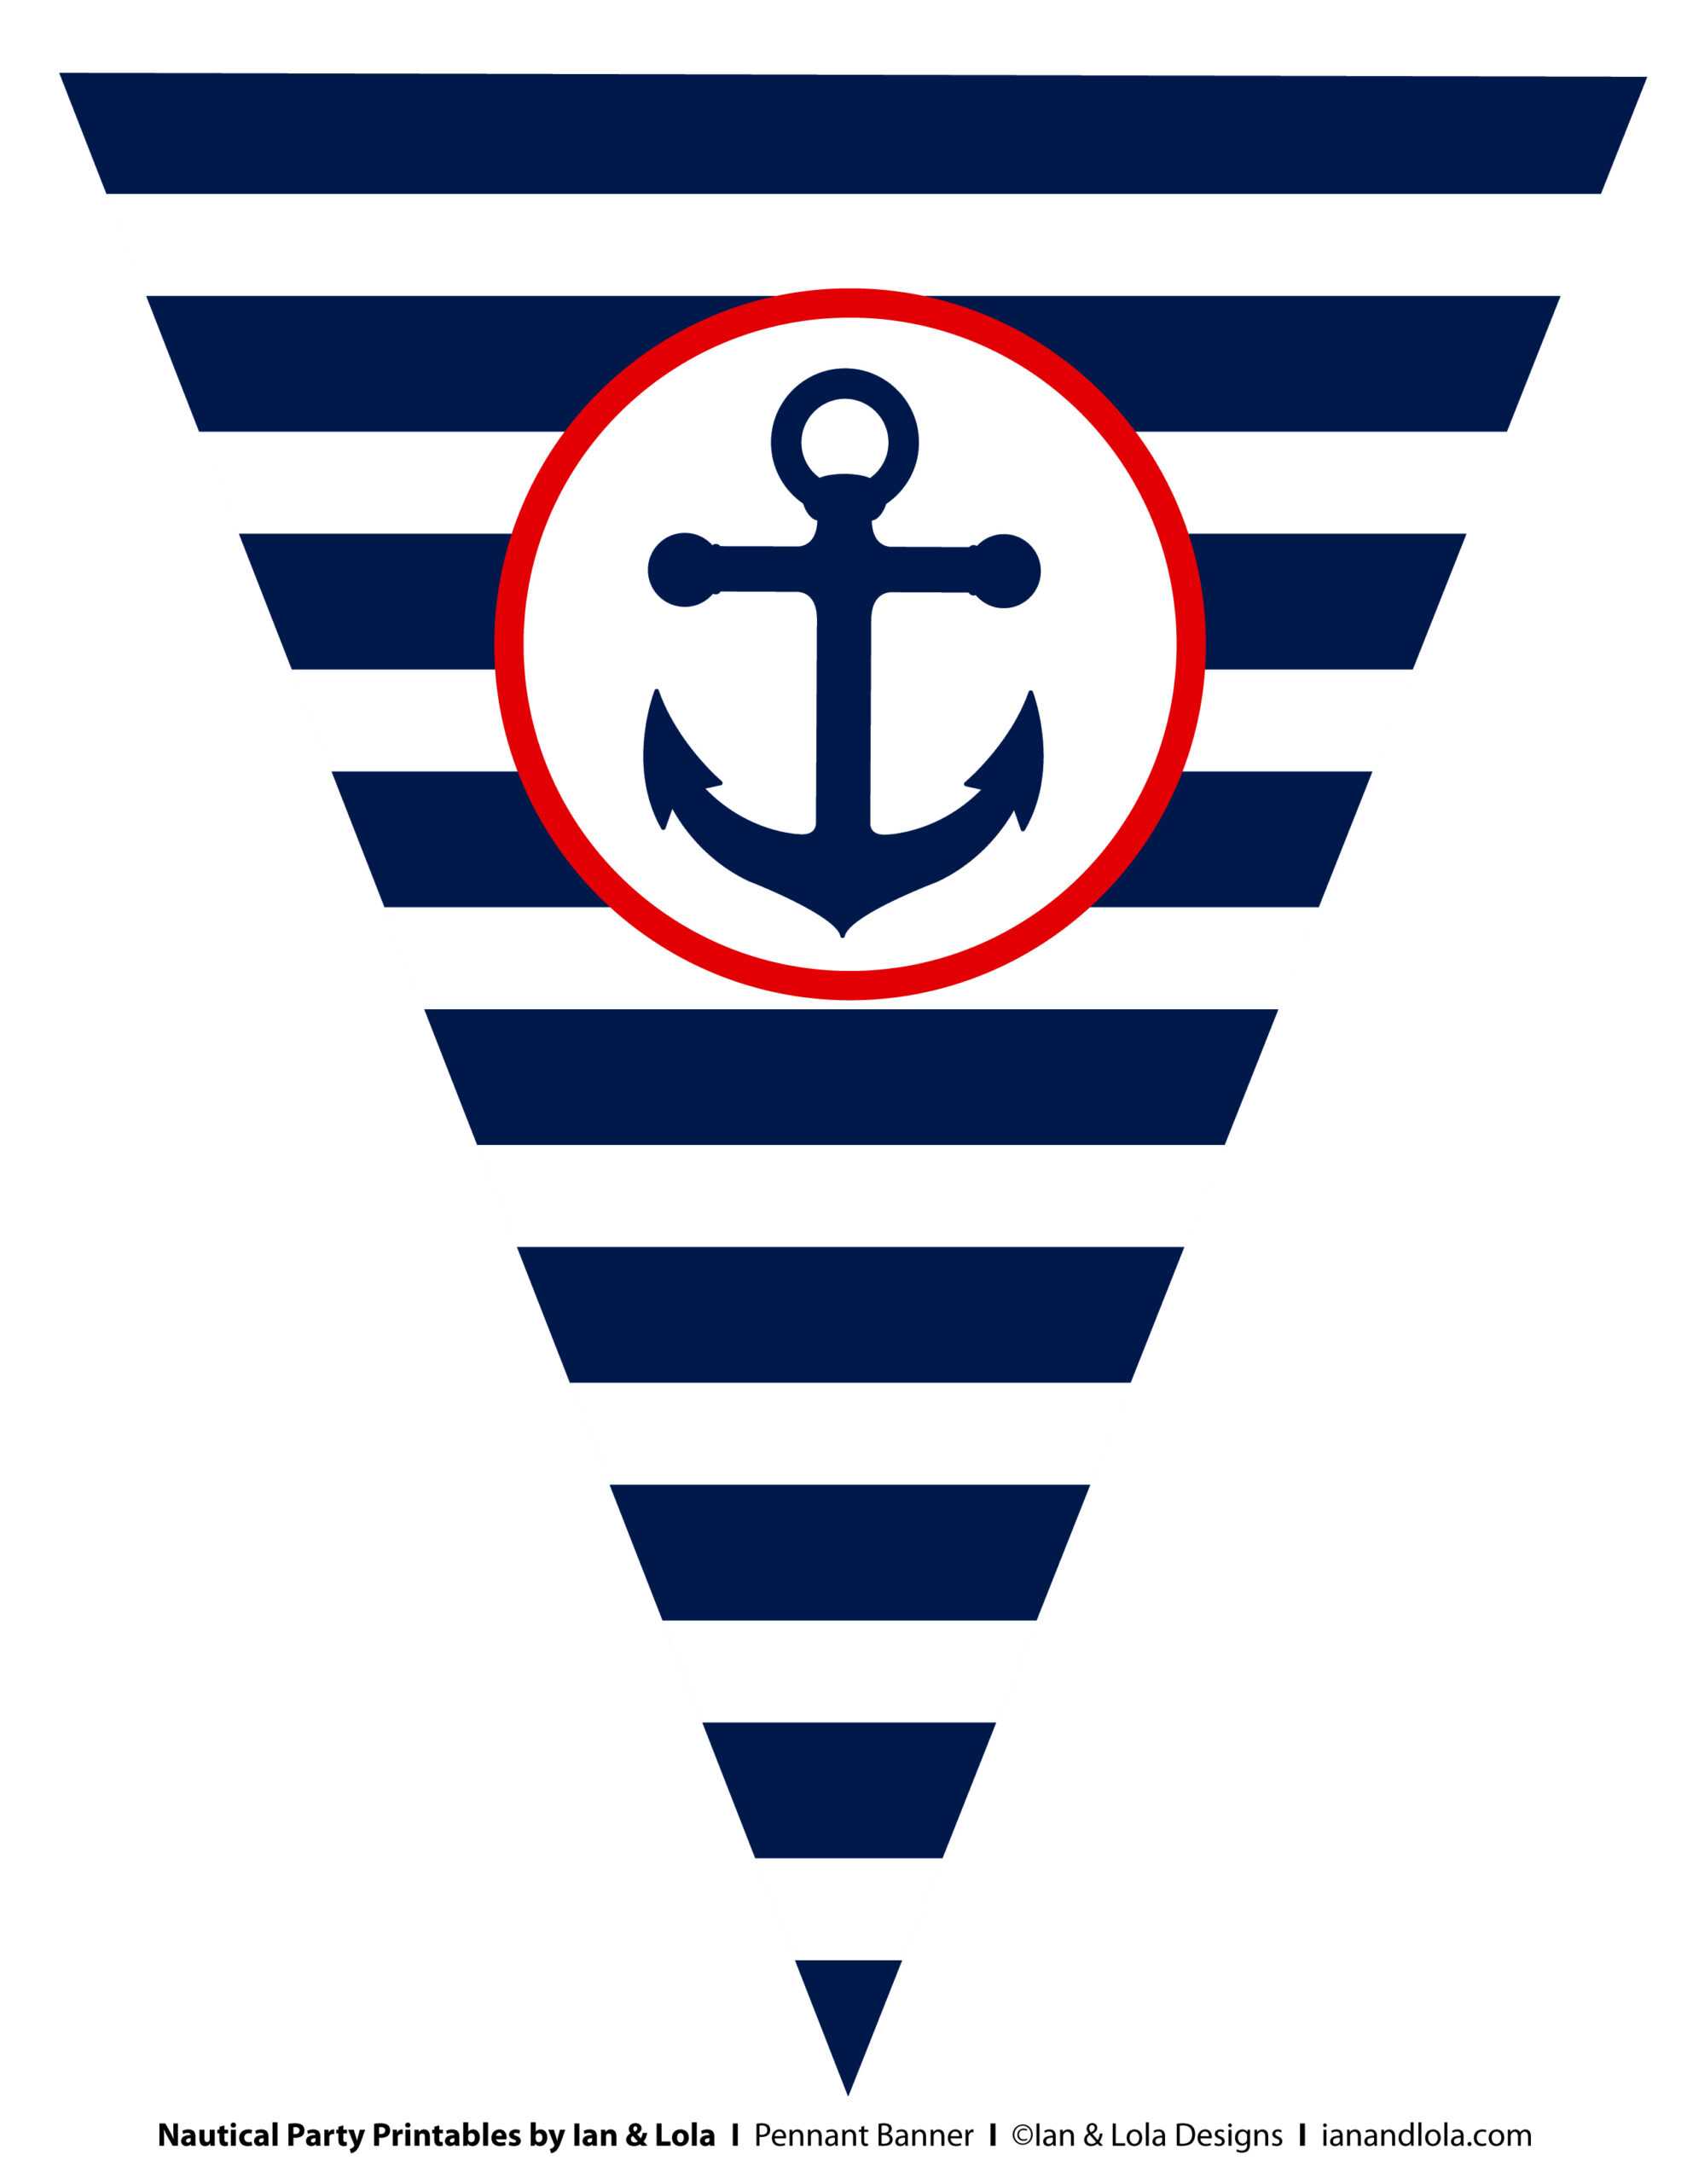 Free Nautical Party Printables From Ian & Lola Designs Throughout Nautical Banner Template